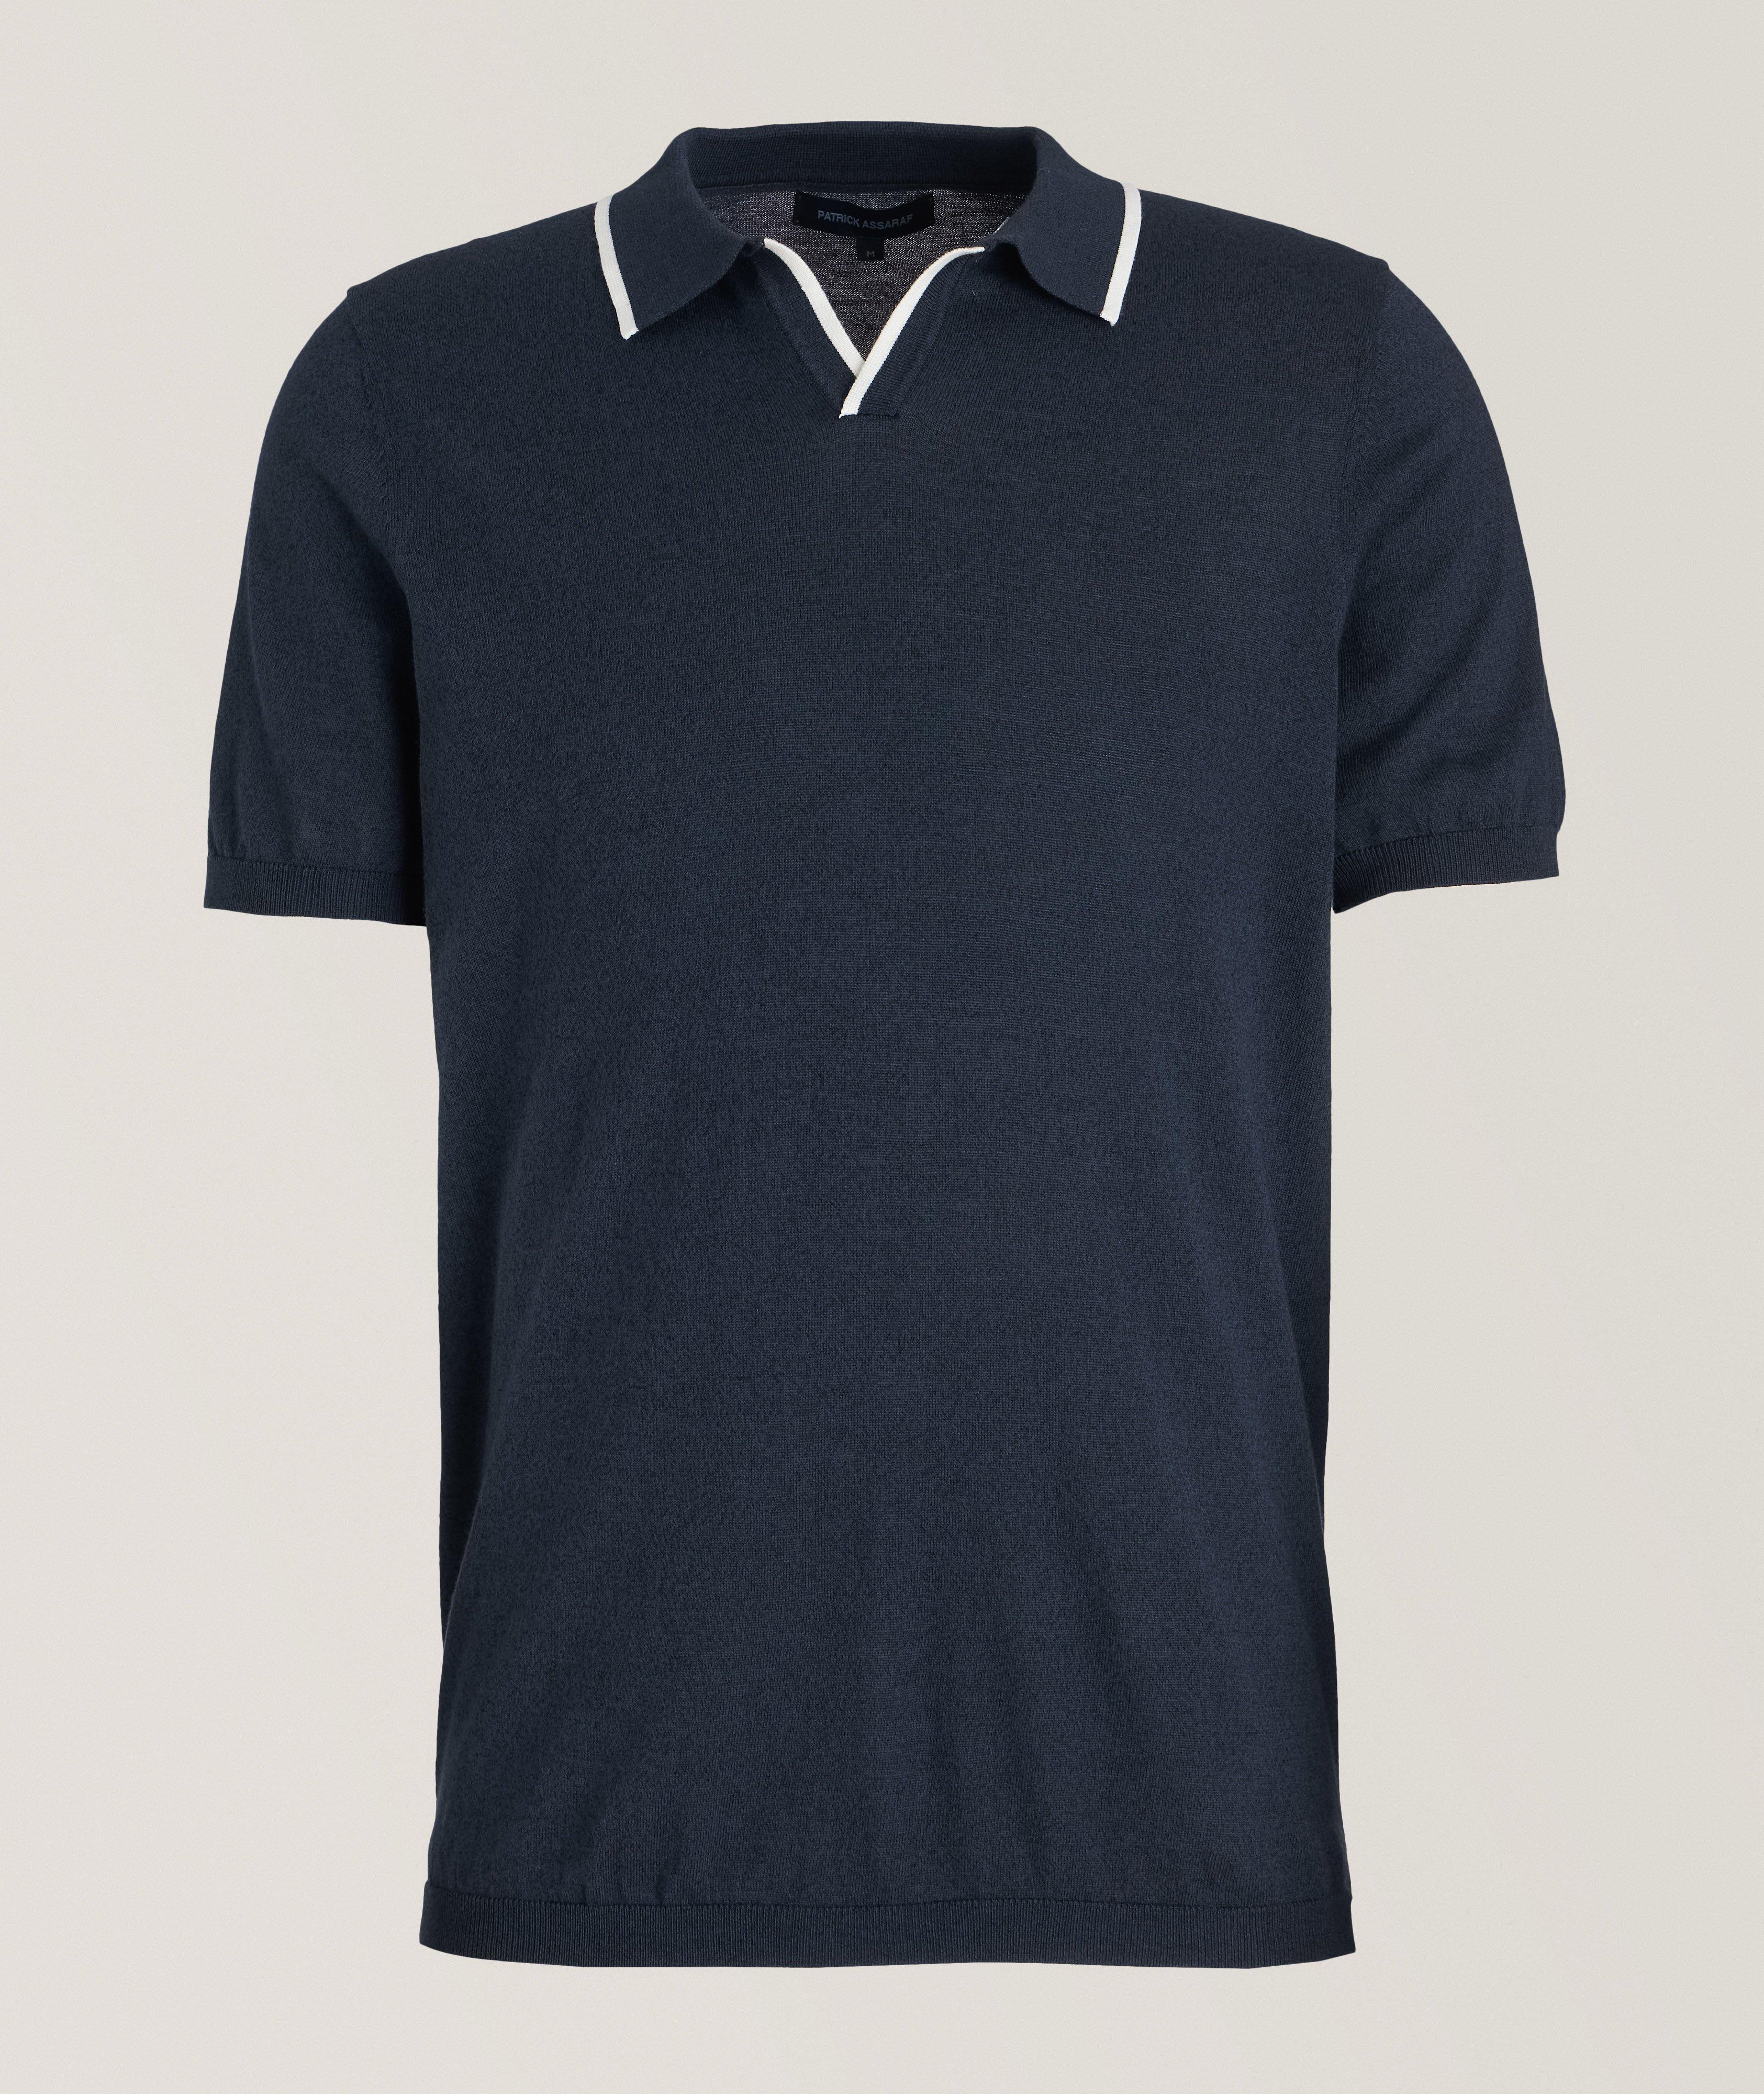 Patrick Assaraf Contrast Piped Cotton-Blend Knit Polo